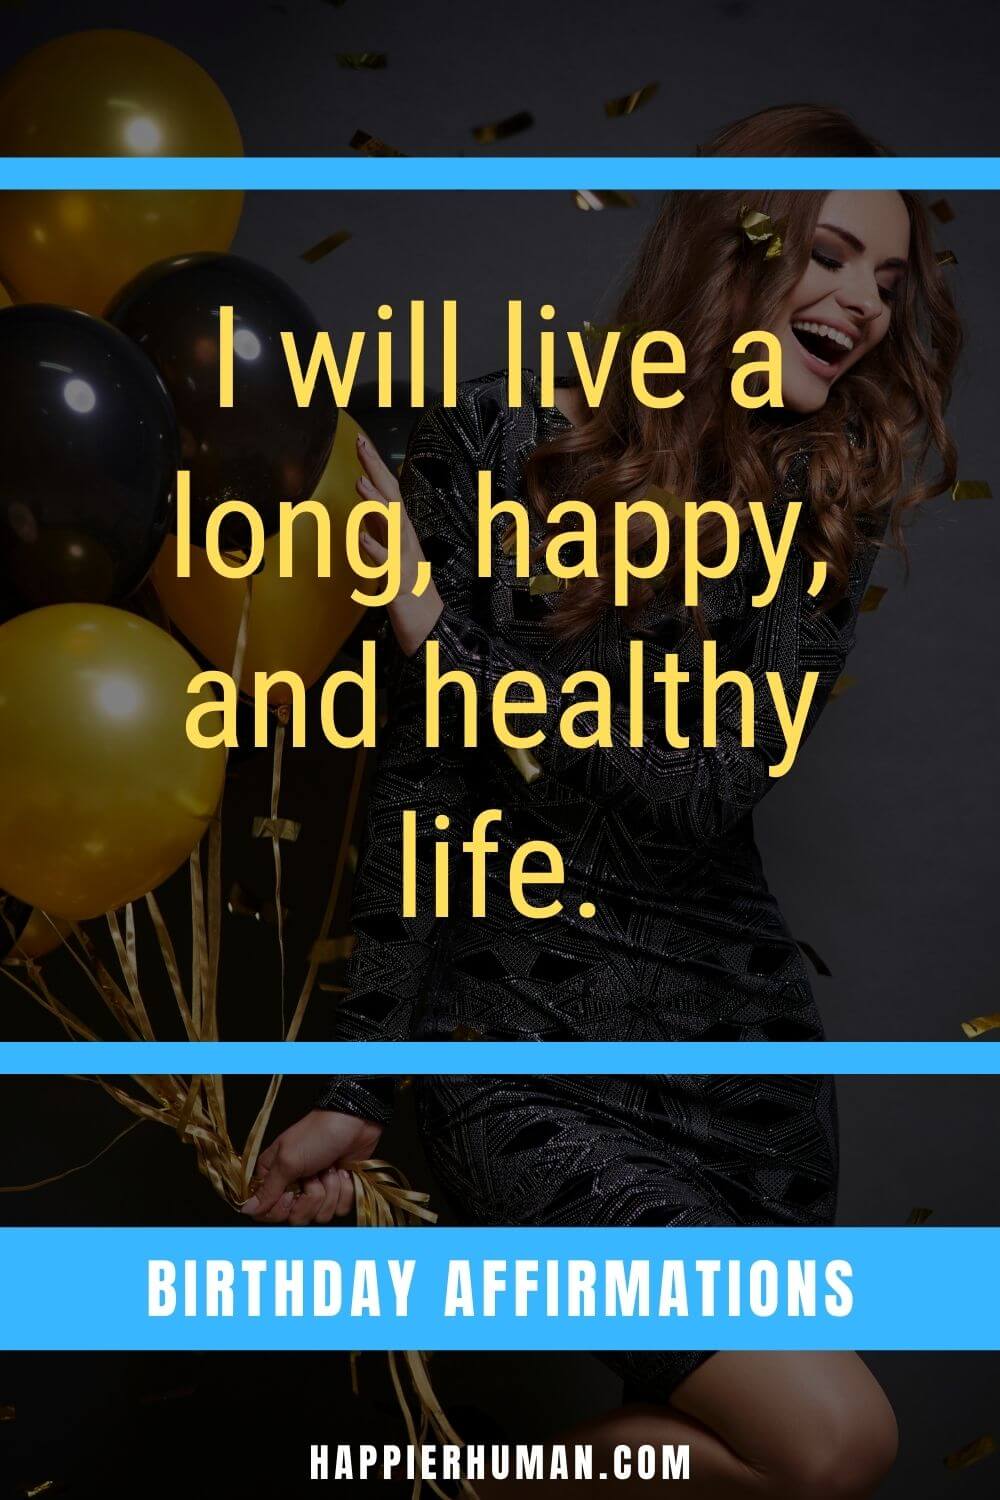 Birthday Affirmations - I will live a long, happy, and healthy life. | birthday affirmations for husband | birthday wishes | birthday quotes